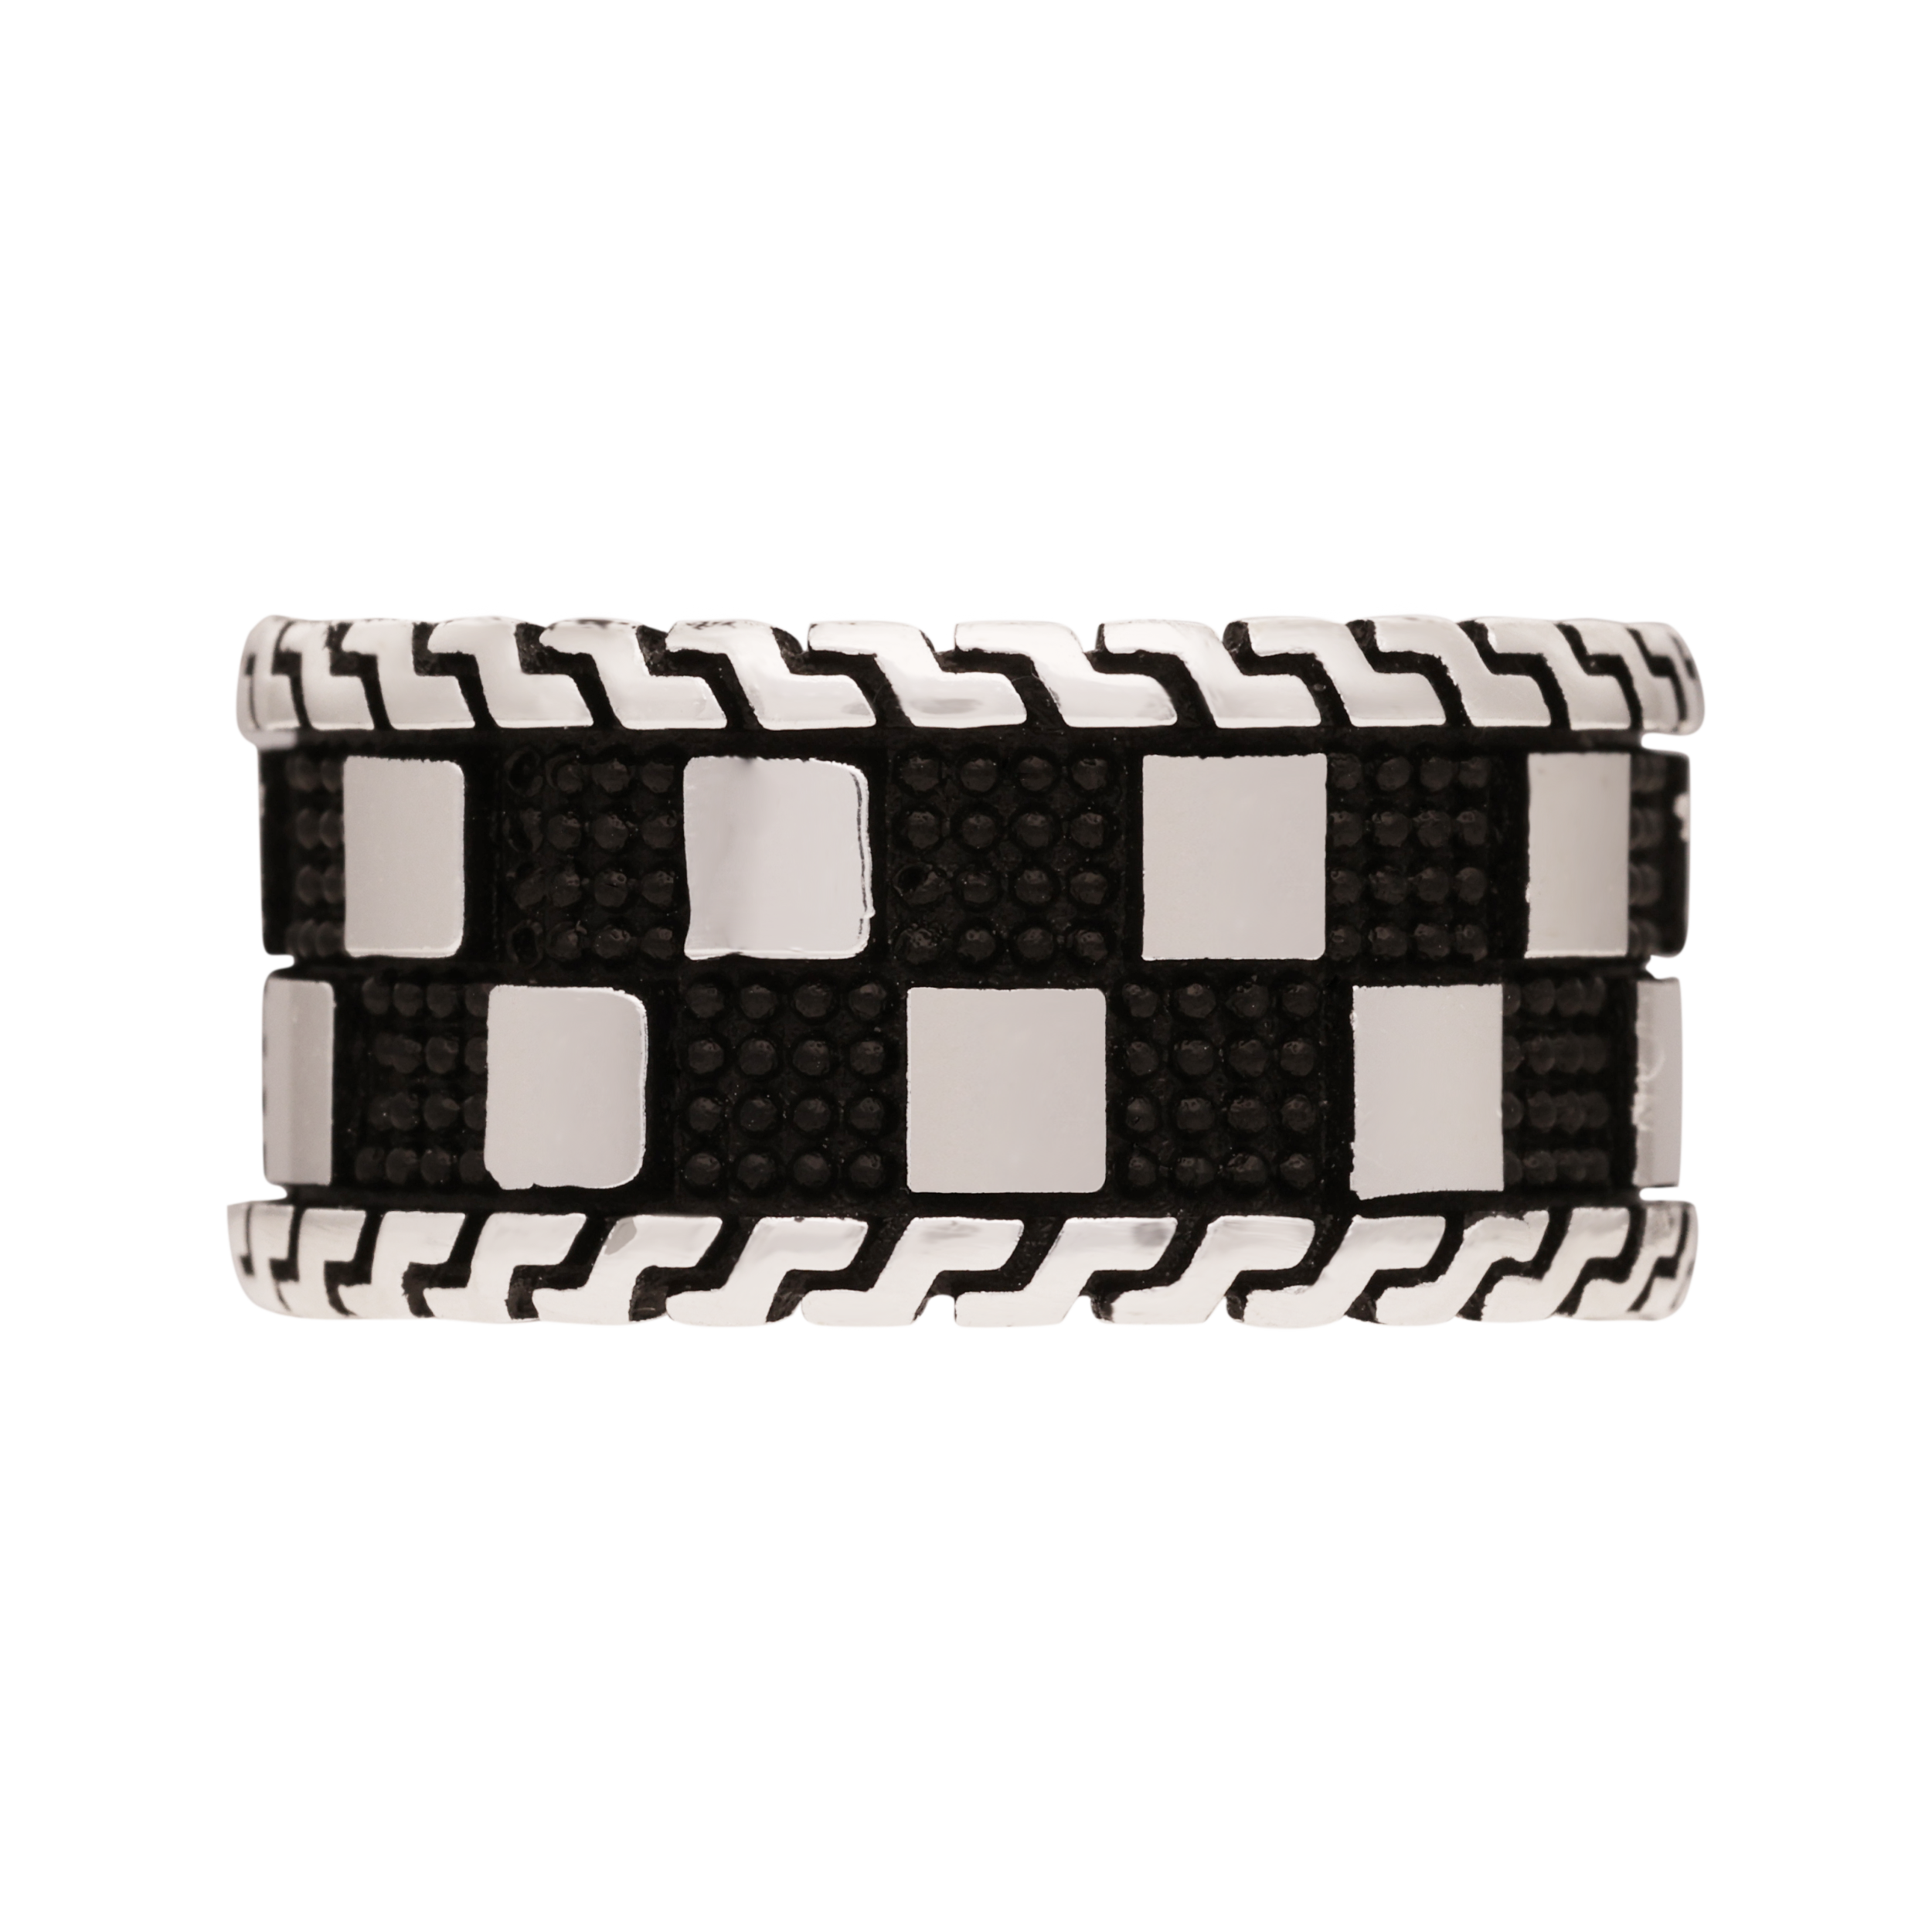 STERLING SILVER OXIDIZED BAND RING | SKU: 0018640182